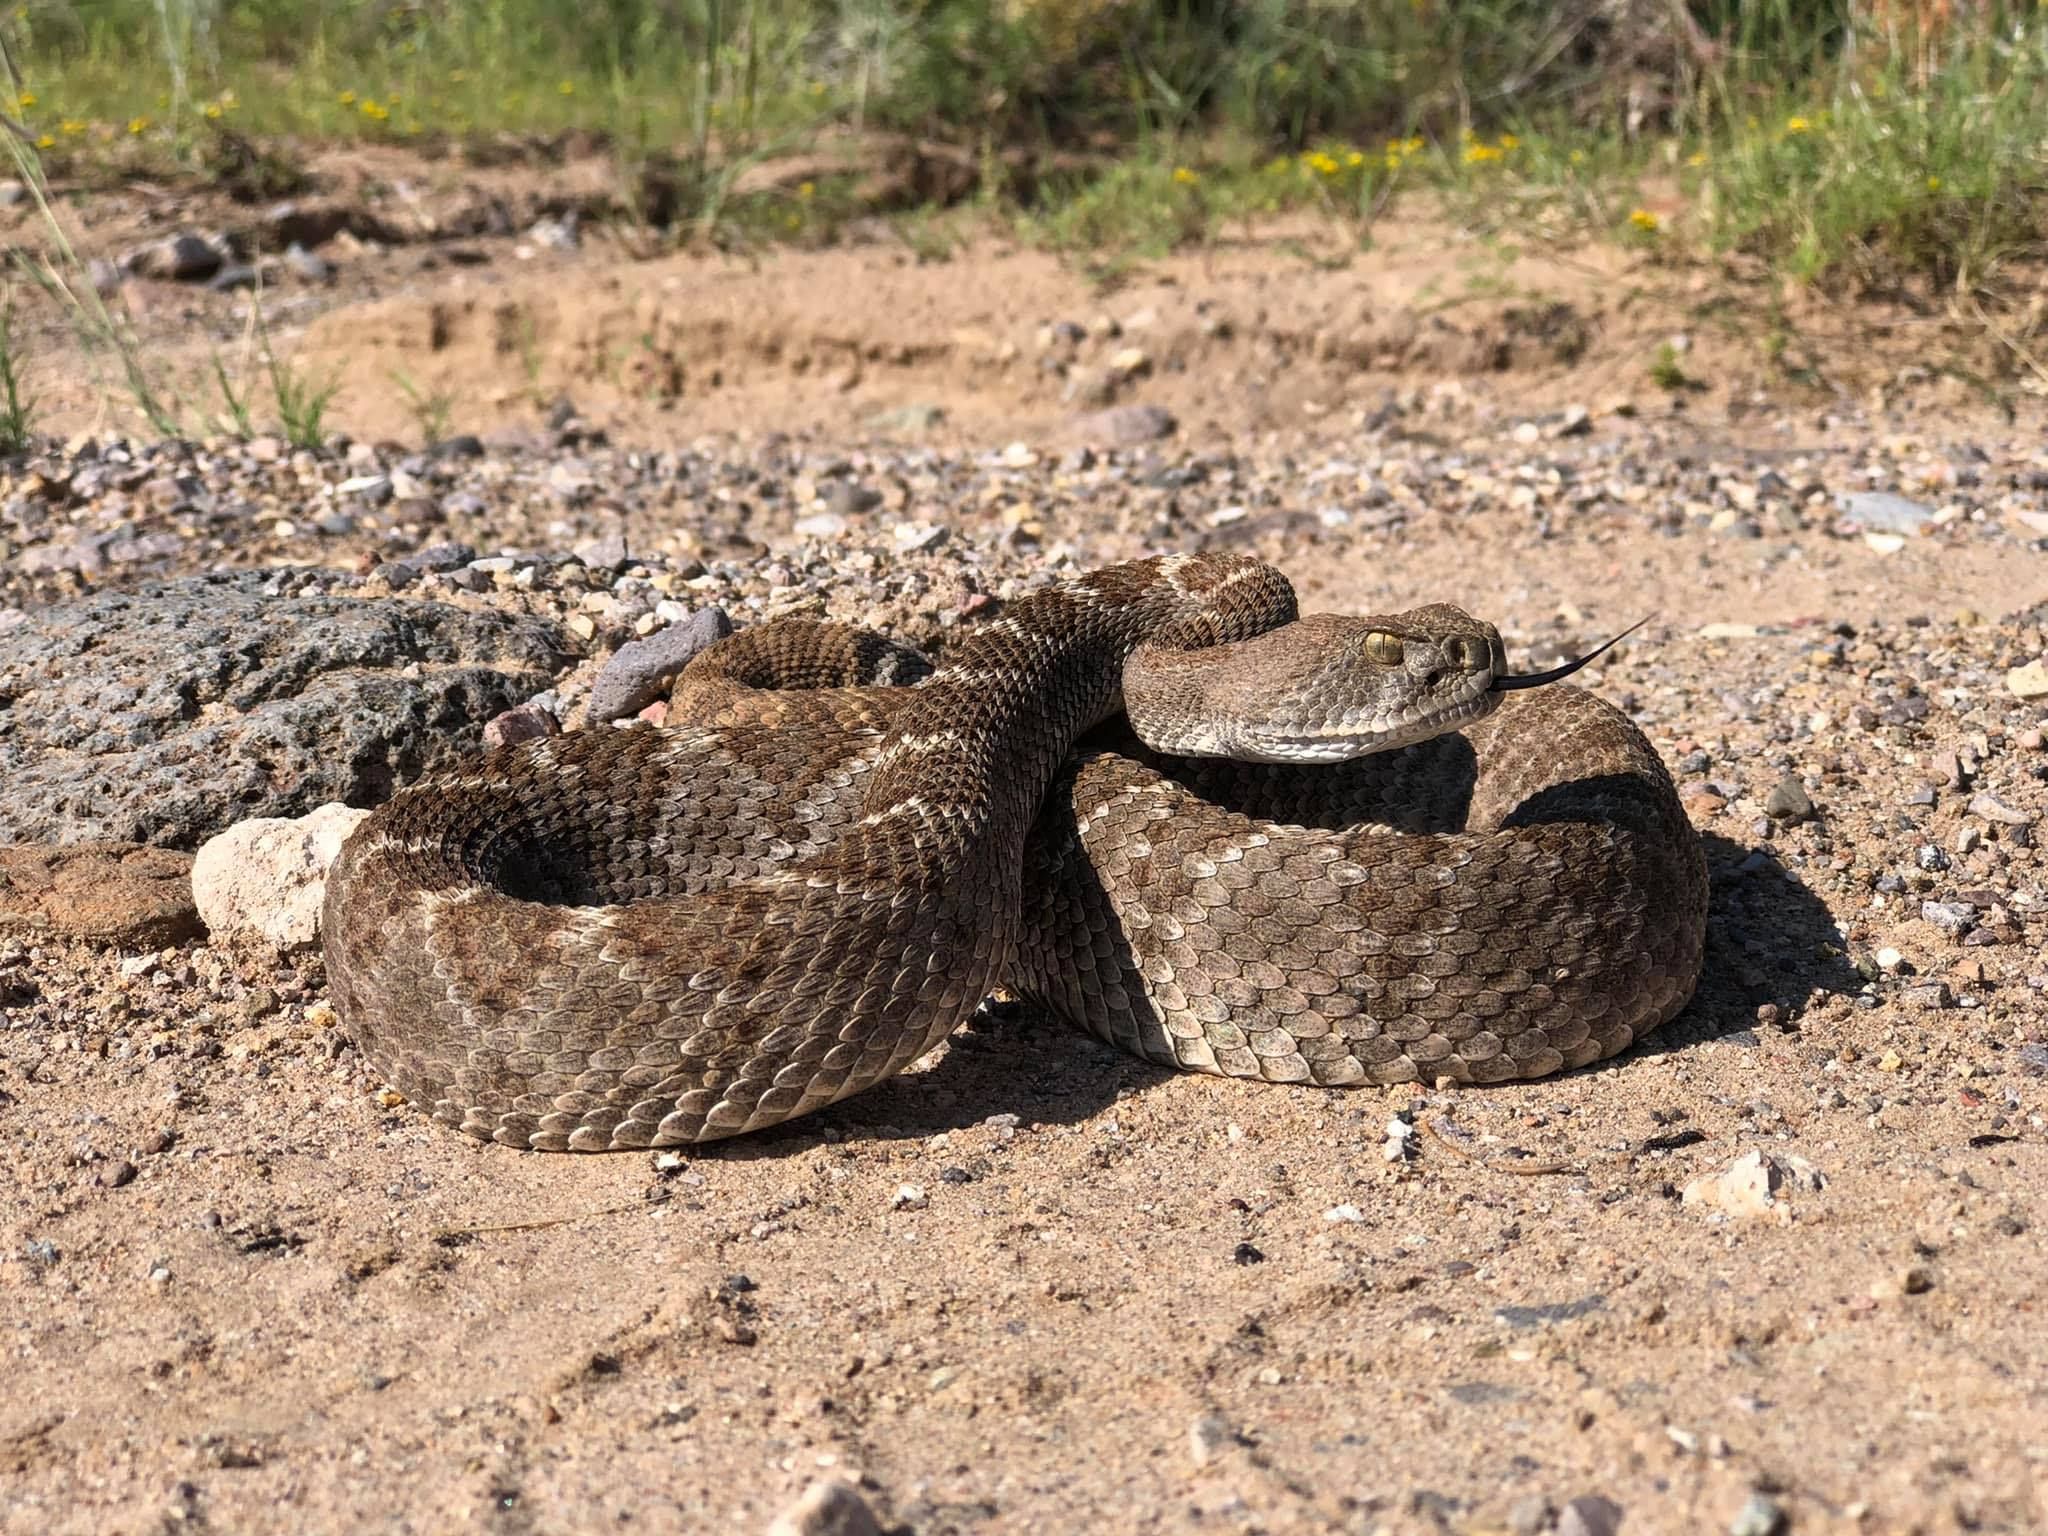 When observed from a safe, respectful distance, most rattlesnakes are generally docile. This western diamondback rattlesnake near Magdalena allowed the author to sit for several minutes taking photographs.